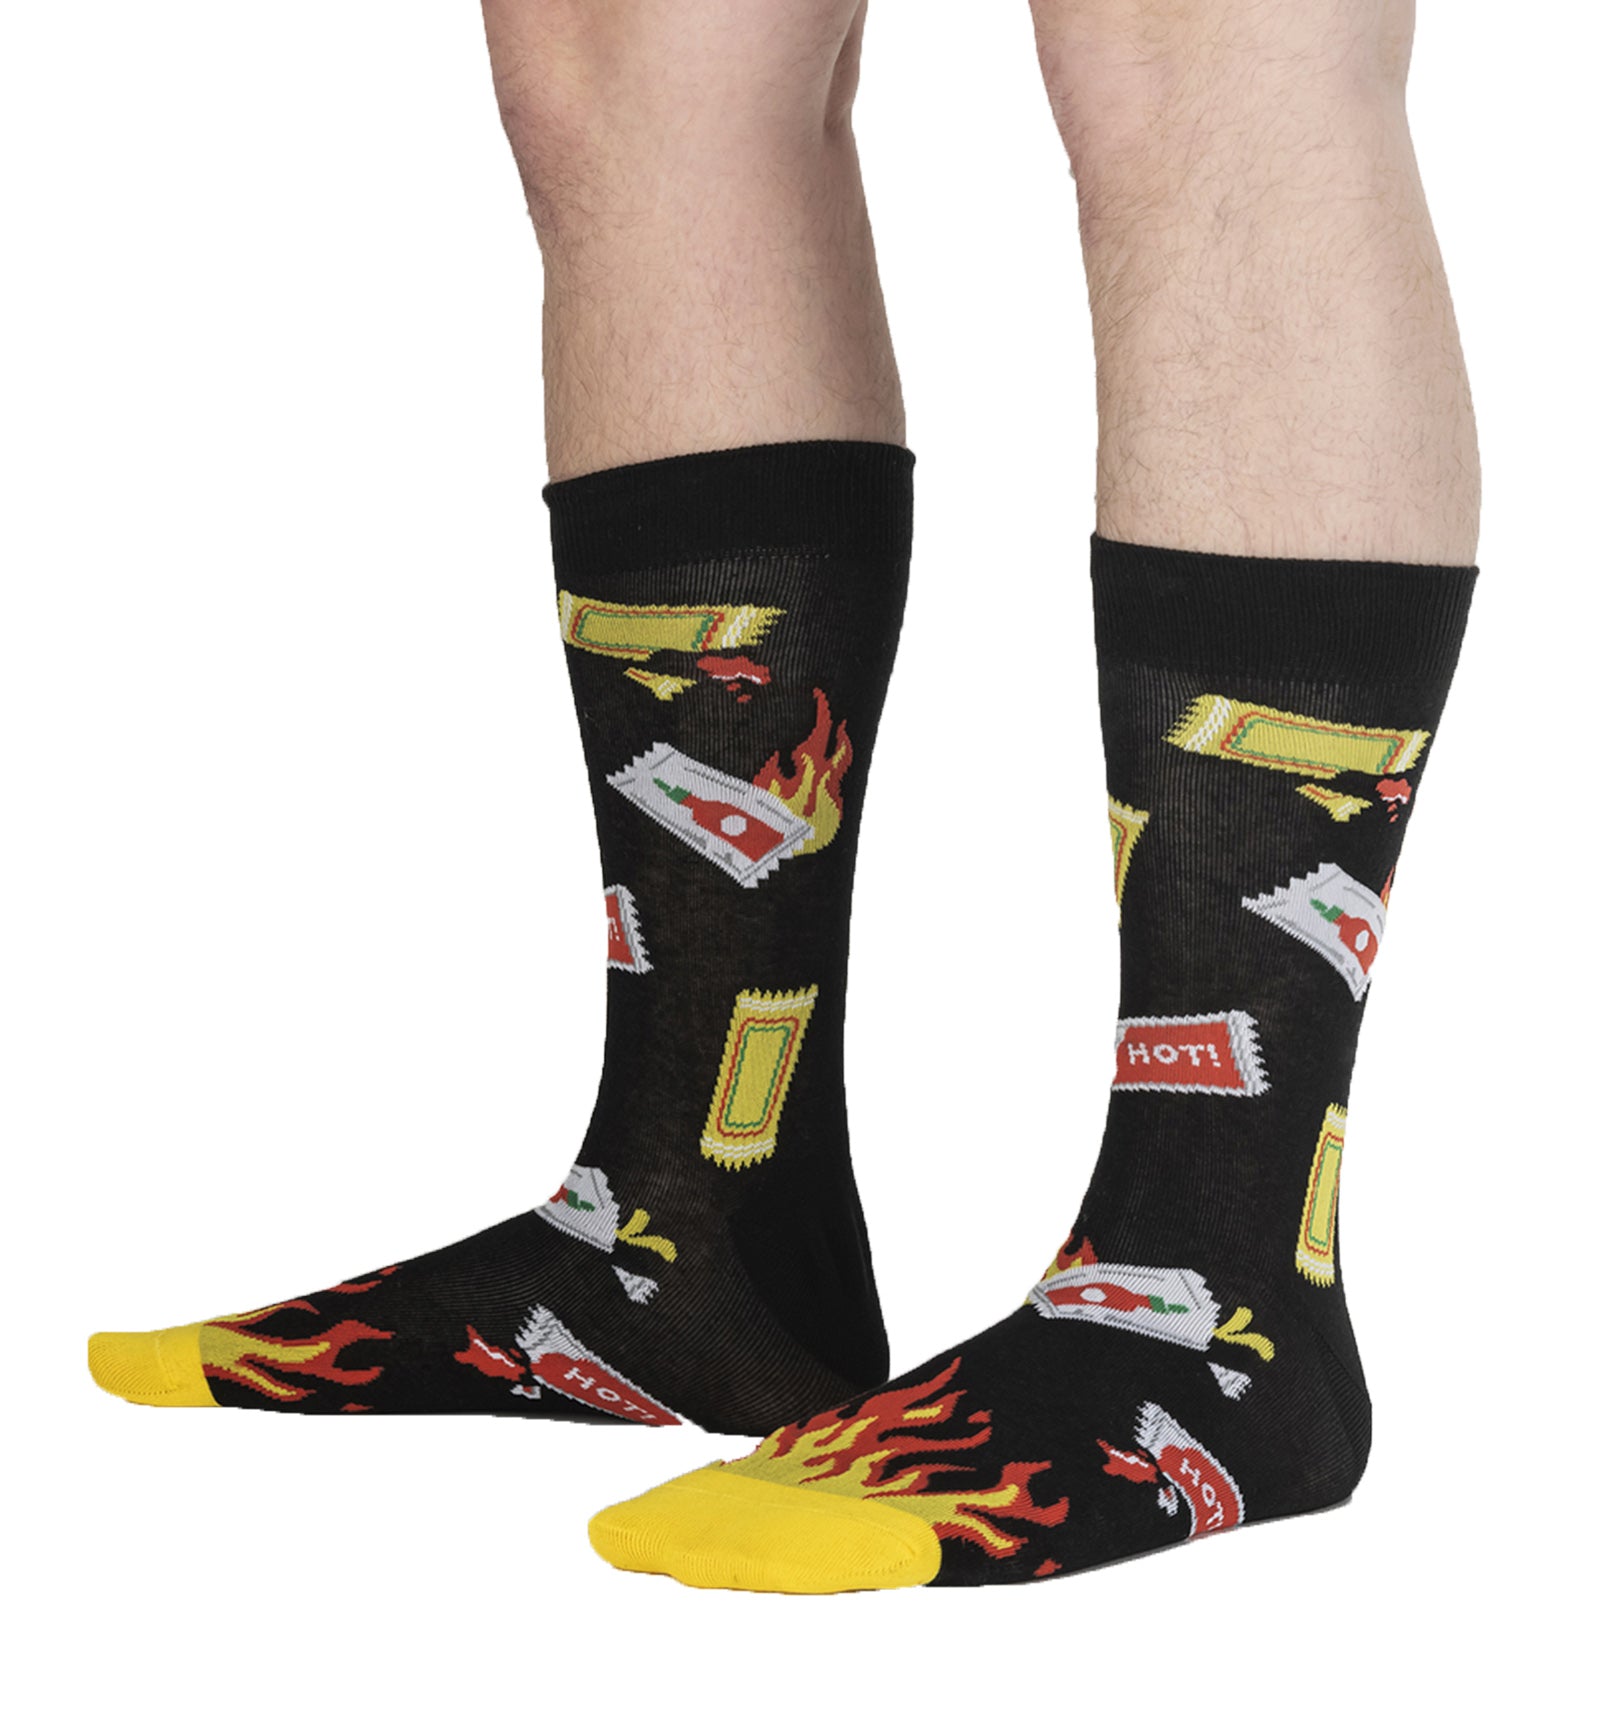 SOCK it to me Men's Crew Socks (MEF0622),Extra Hot - Extra Hot,One Size